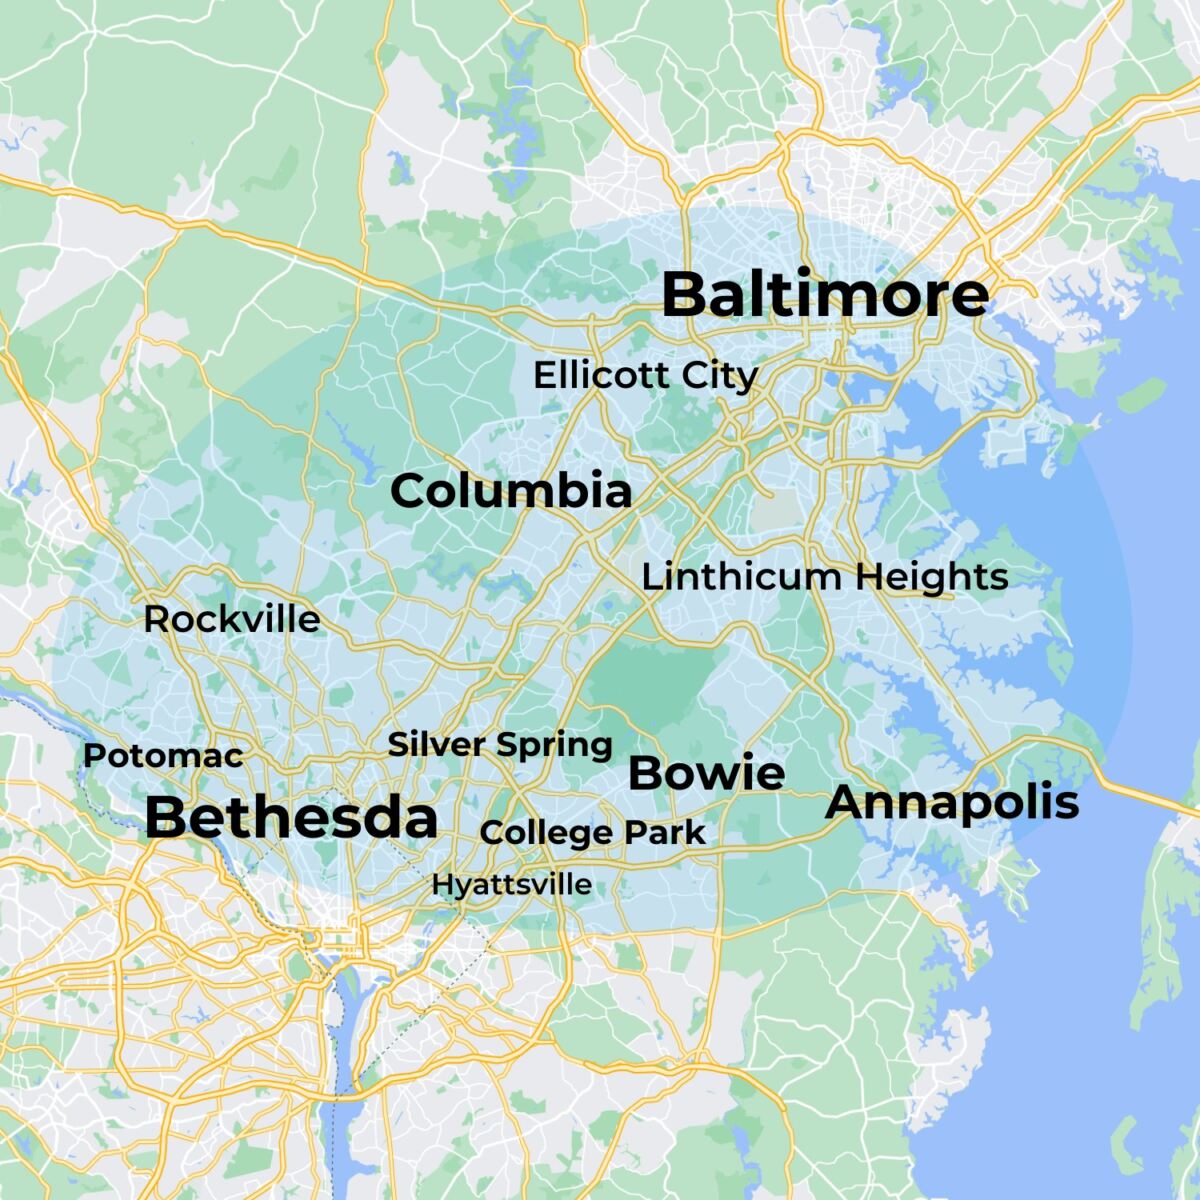 MovementX physical therapy services coverage map of Maryland including Bethesda, Baltimore, Bowie, Chevy Chase, Columbia, Silver Spring, Annapolis, and College Park